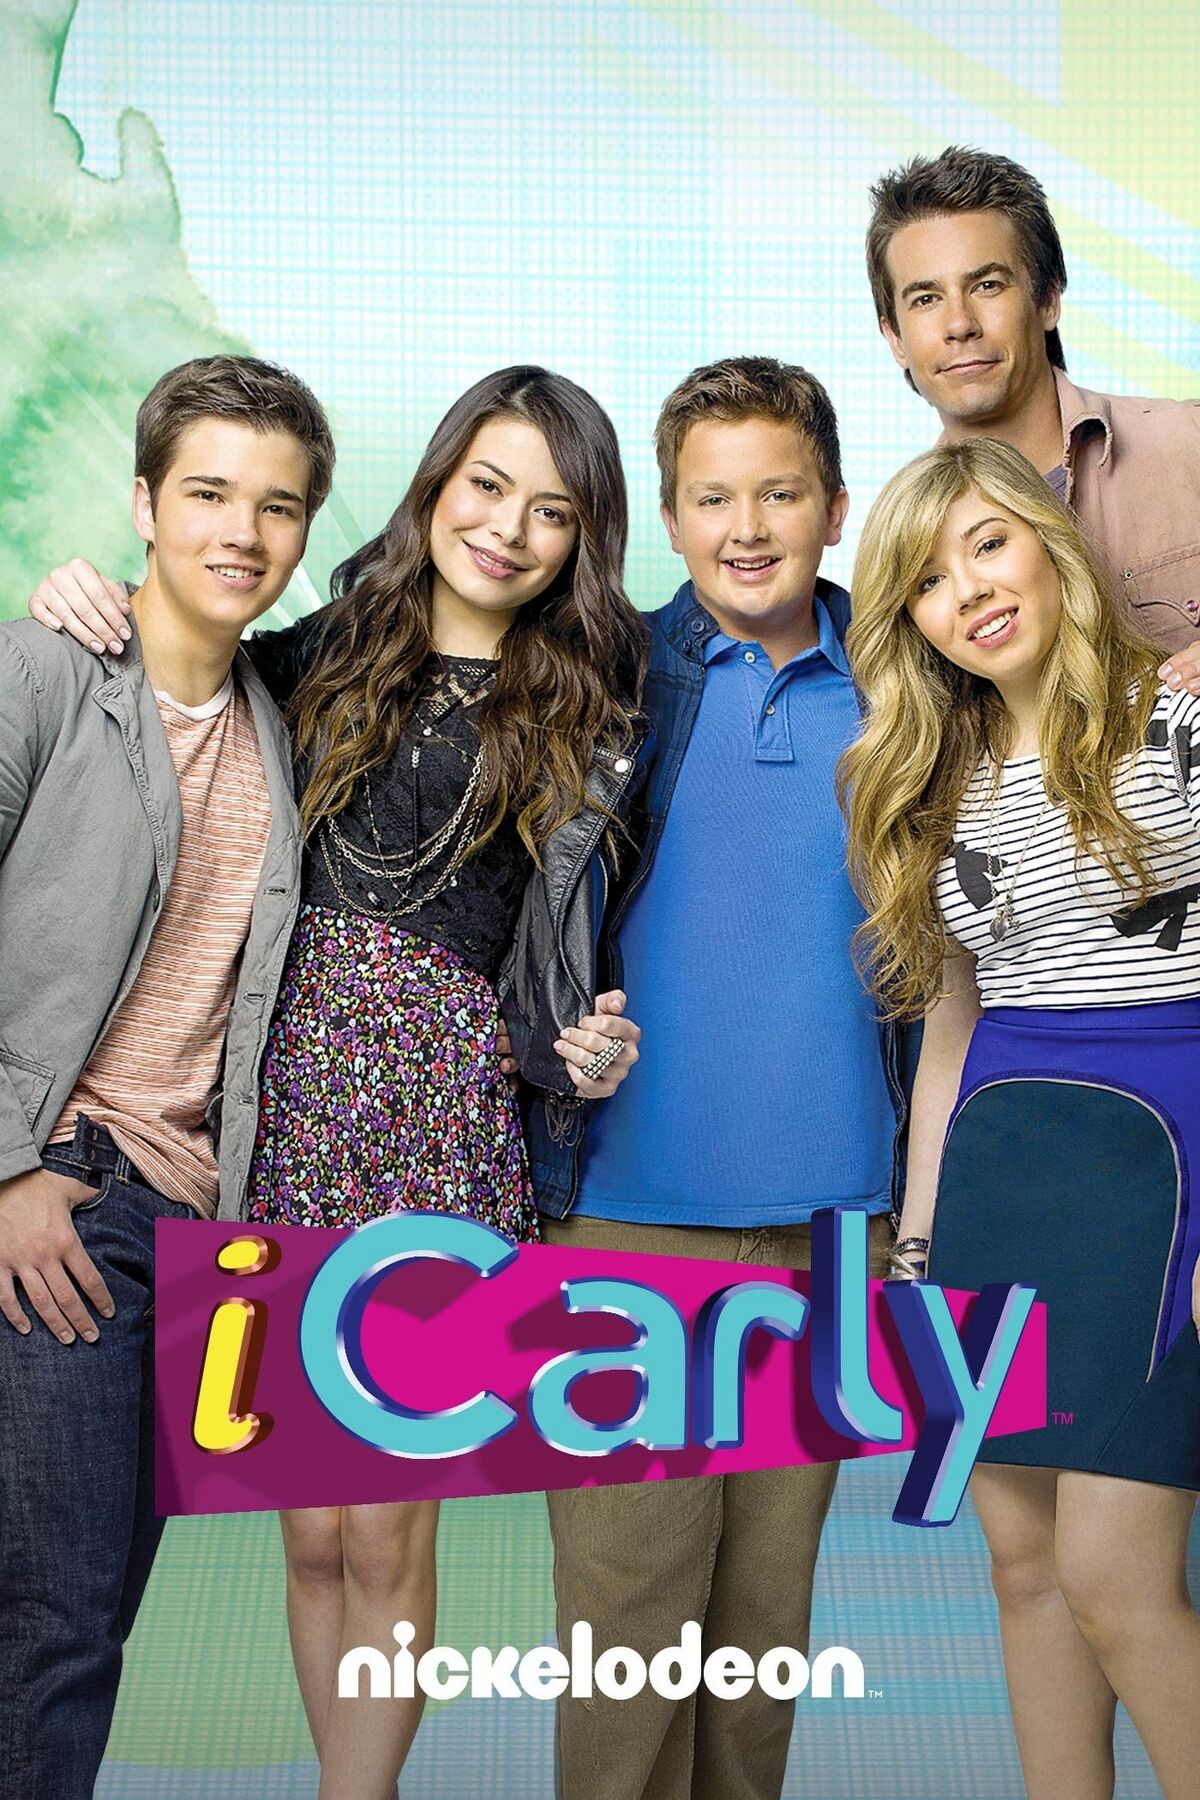 https://static.wikia.nocookie.net/international-entertainment-project/images/9/96/ICarly_-_poster_%28English%29.jpg/revision/latest/scale-to-width-down/1200?cb=20221209232457